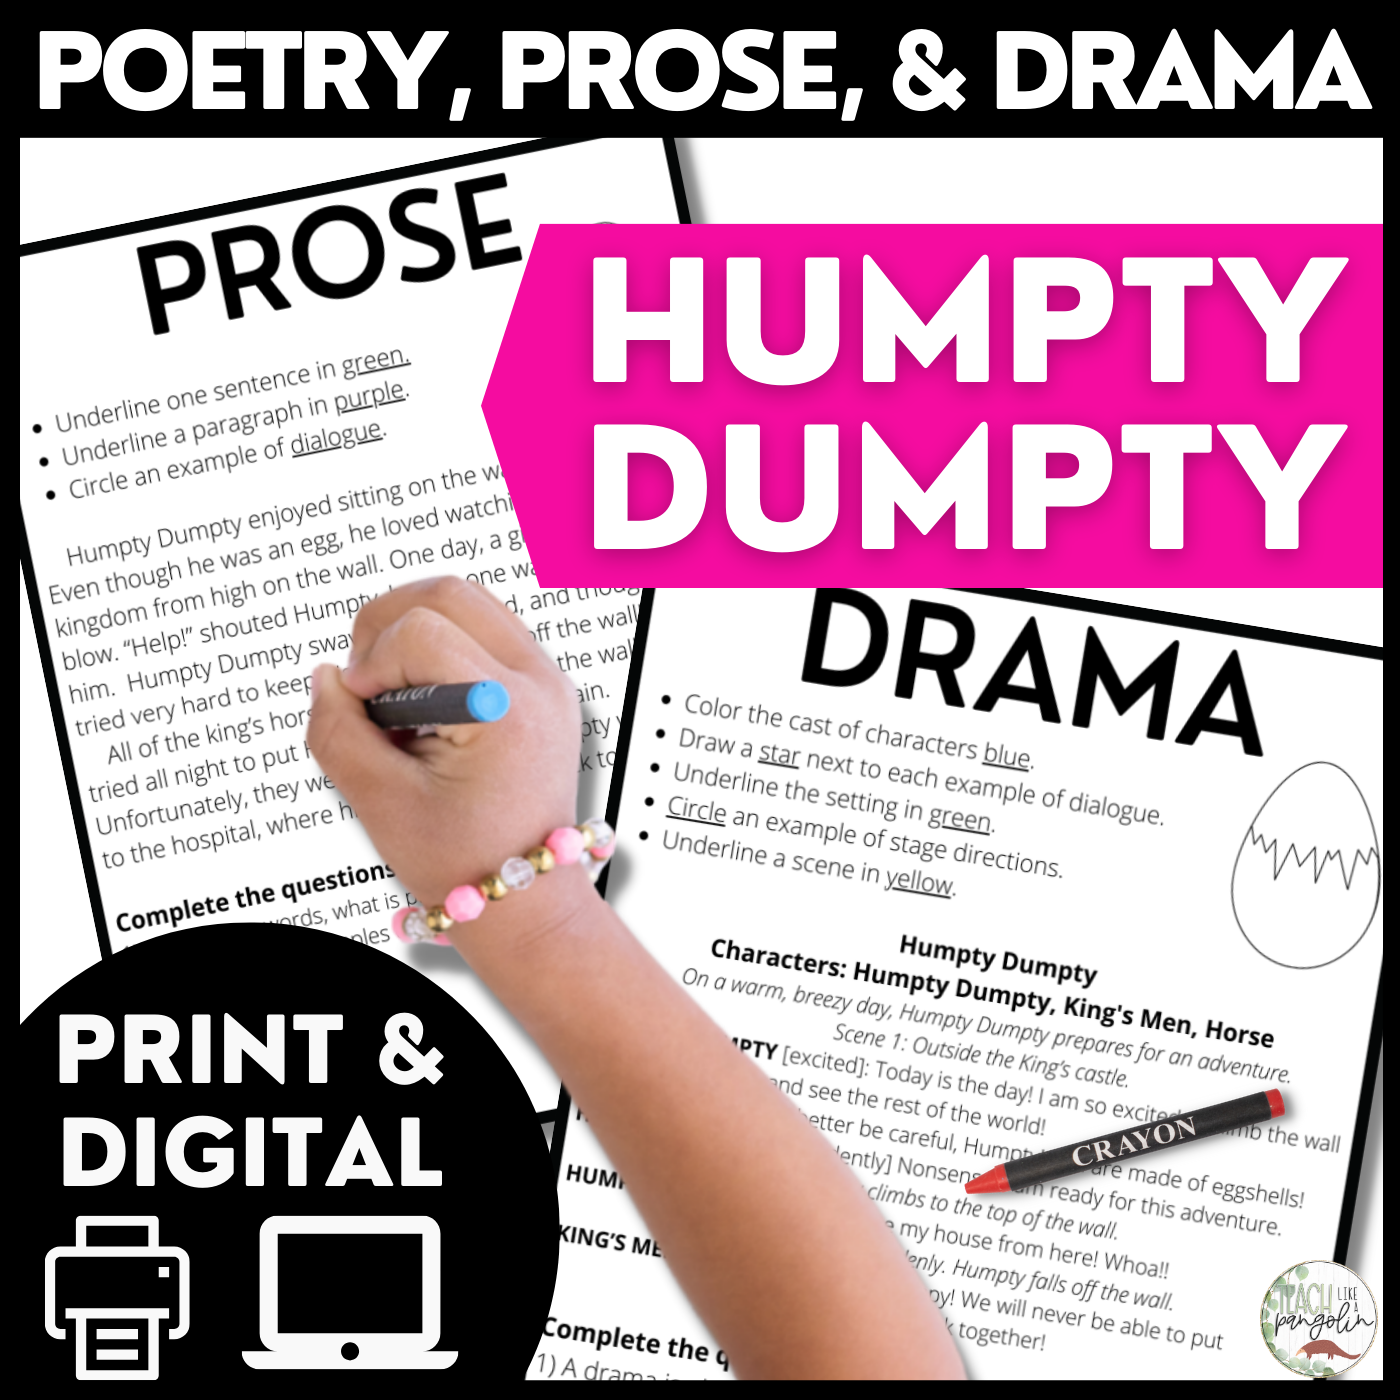 Comparing Poetry Prose and Drama - Humpty Dumpty